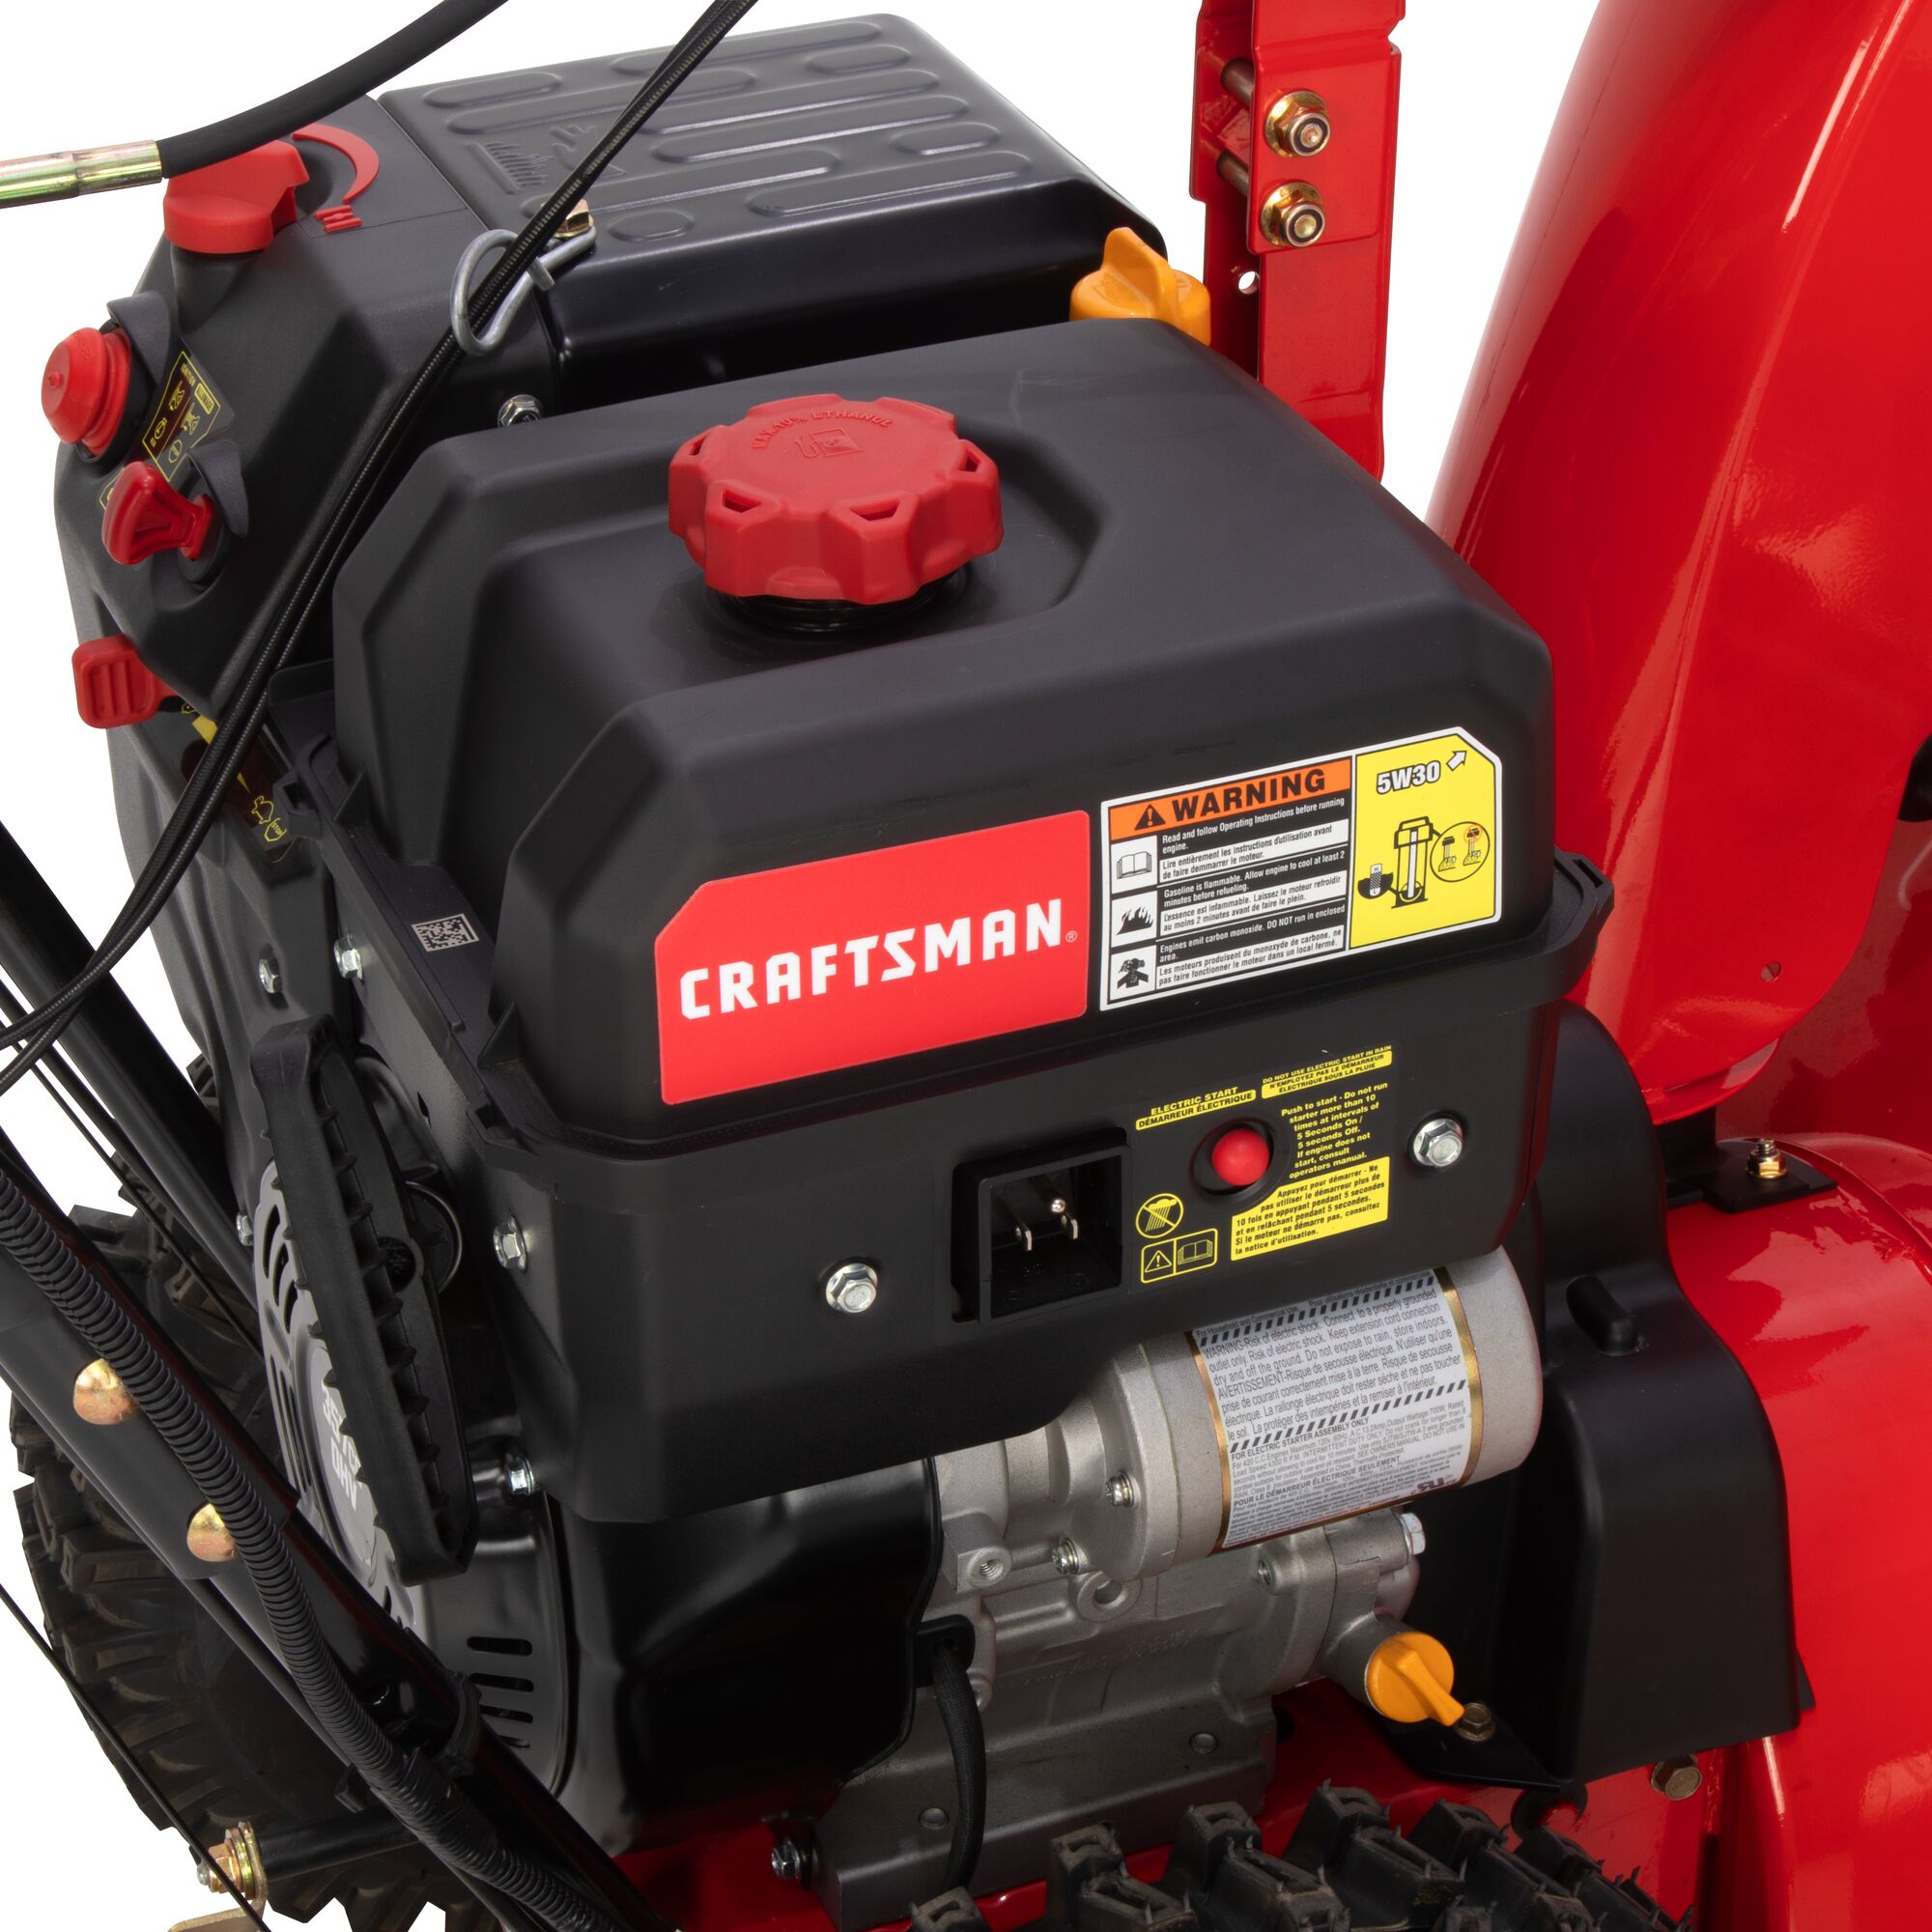 CRAFTSMAN Performance 30 Two-Stage Gas Snow Blower on white background